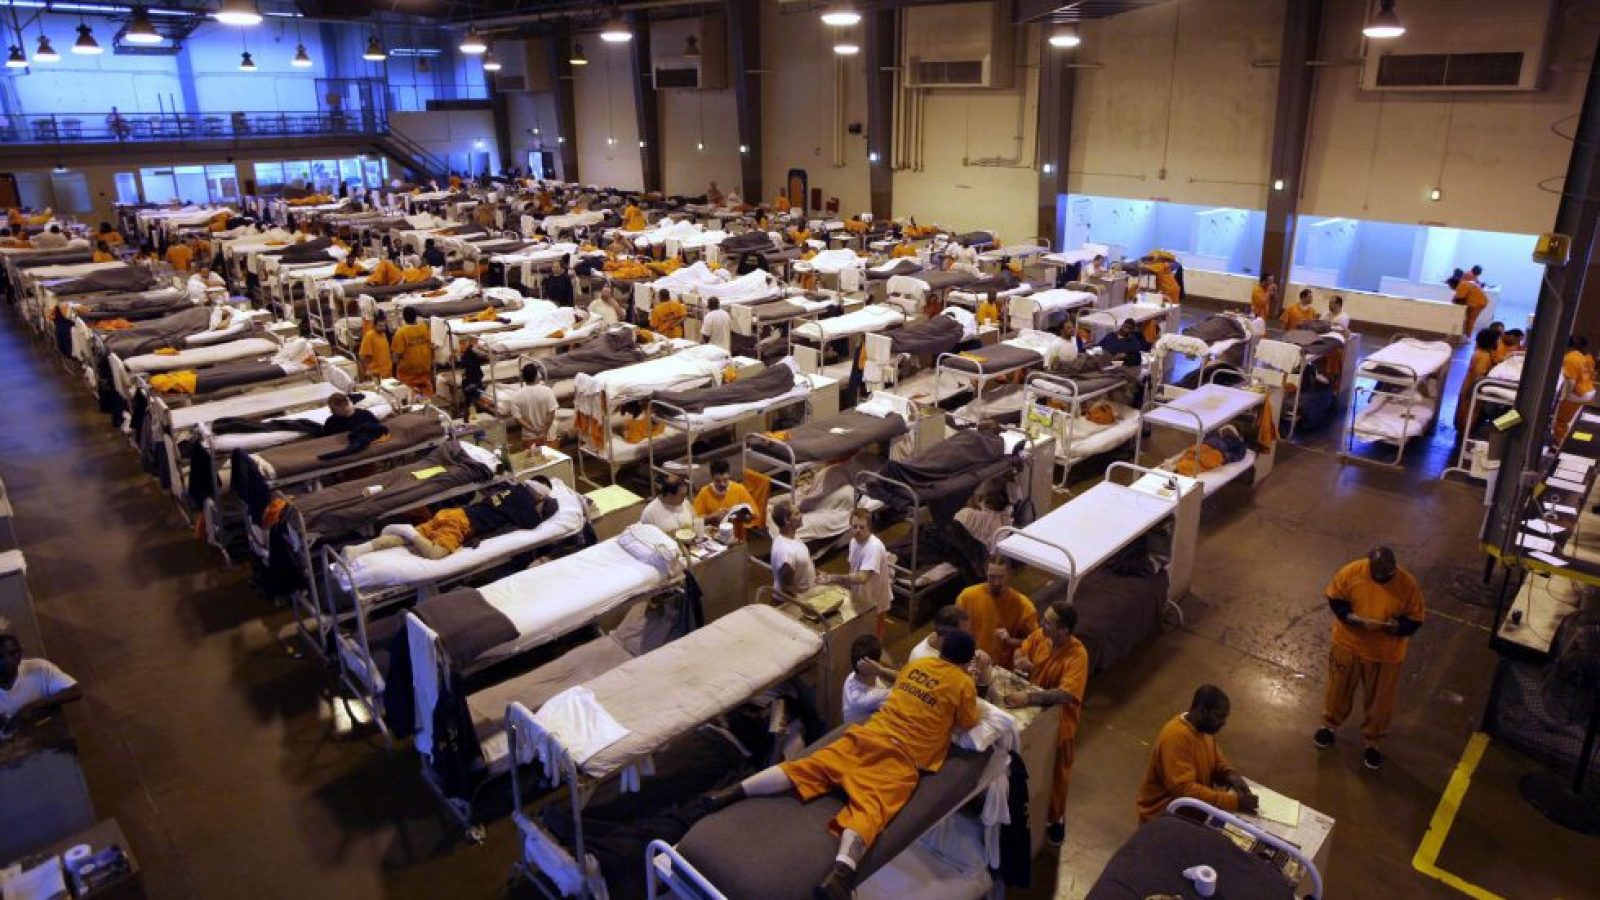 Several hundred inmates crowd the gymnasium at San Quentin prison in San Quentin, Calif.